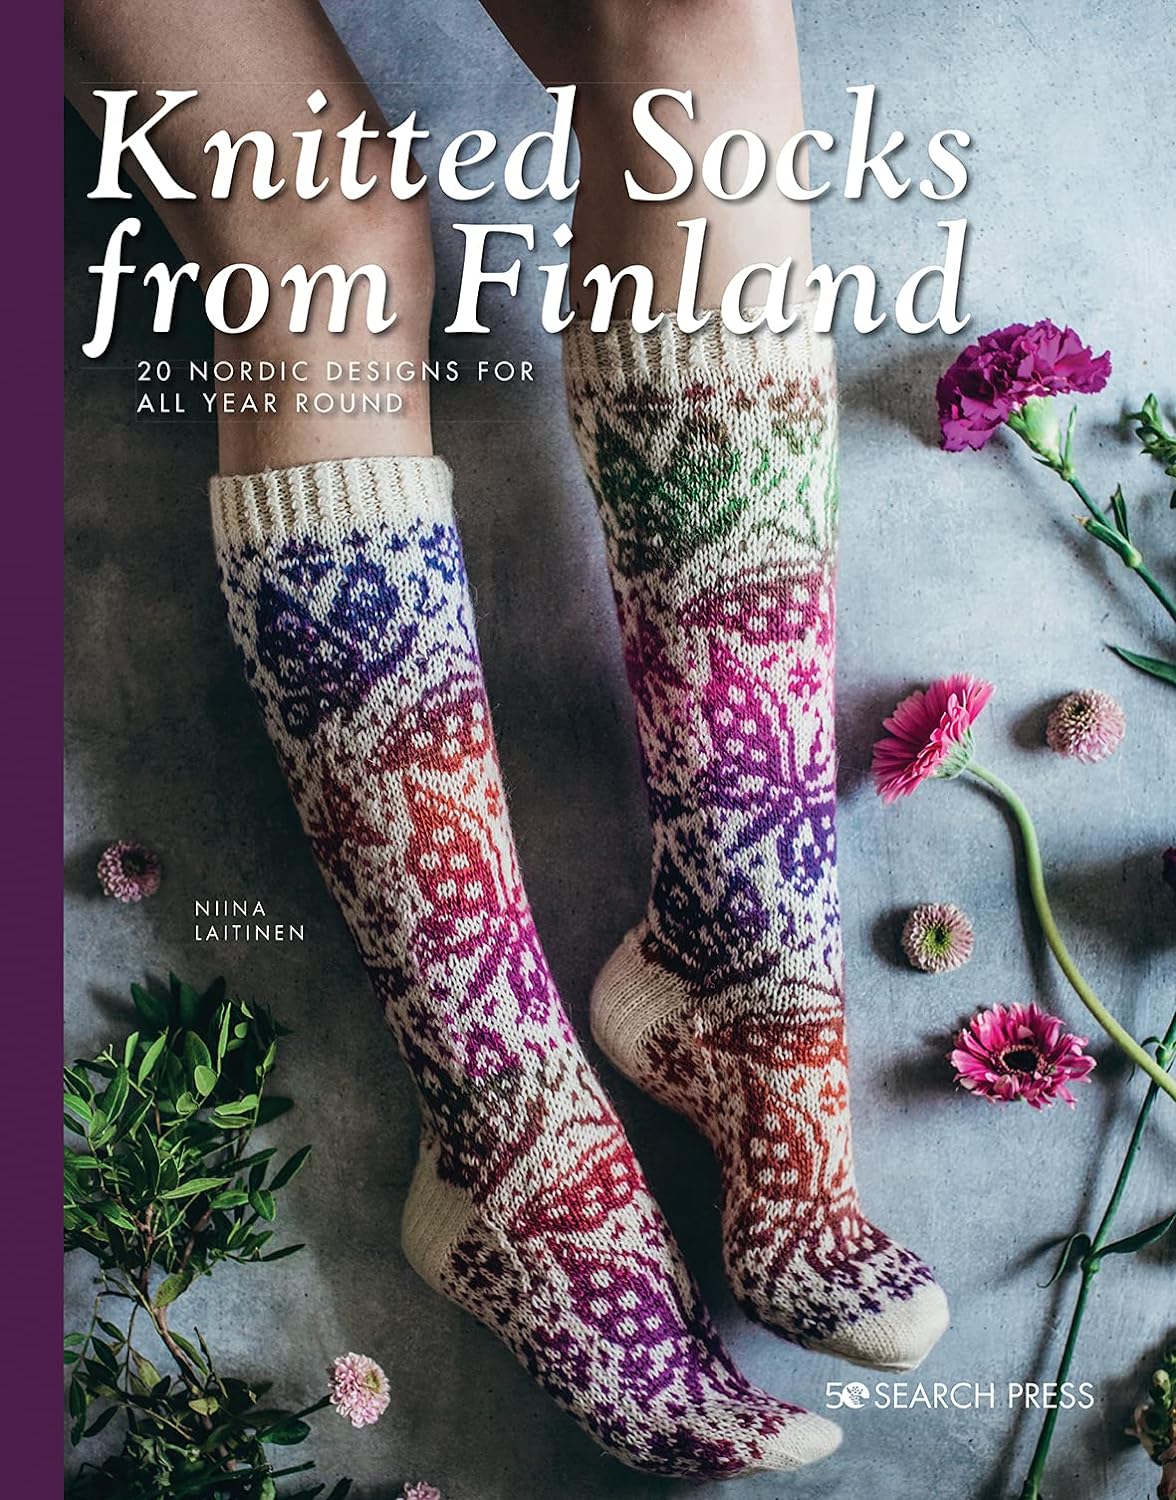 Knitted Socks from Finland: 20 Nordic Designs for all Year